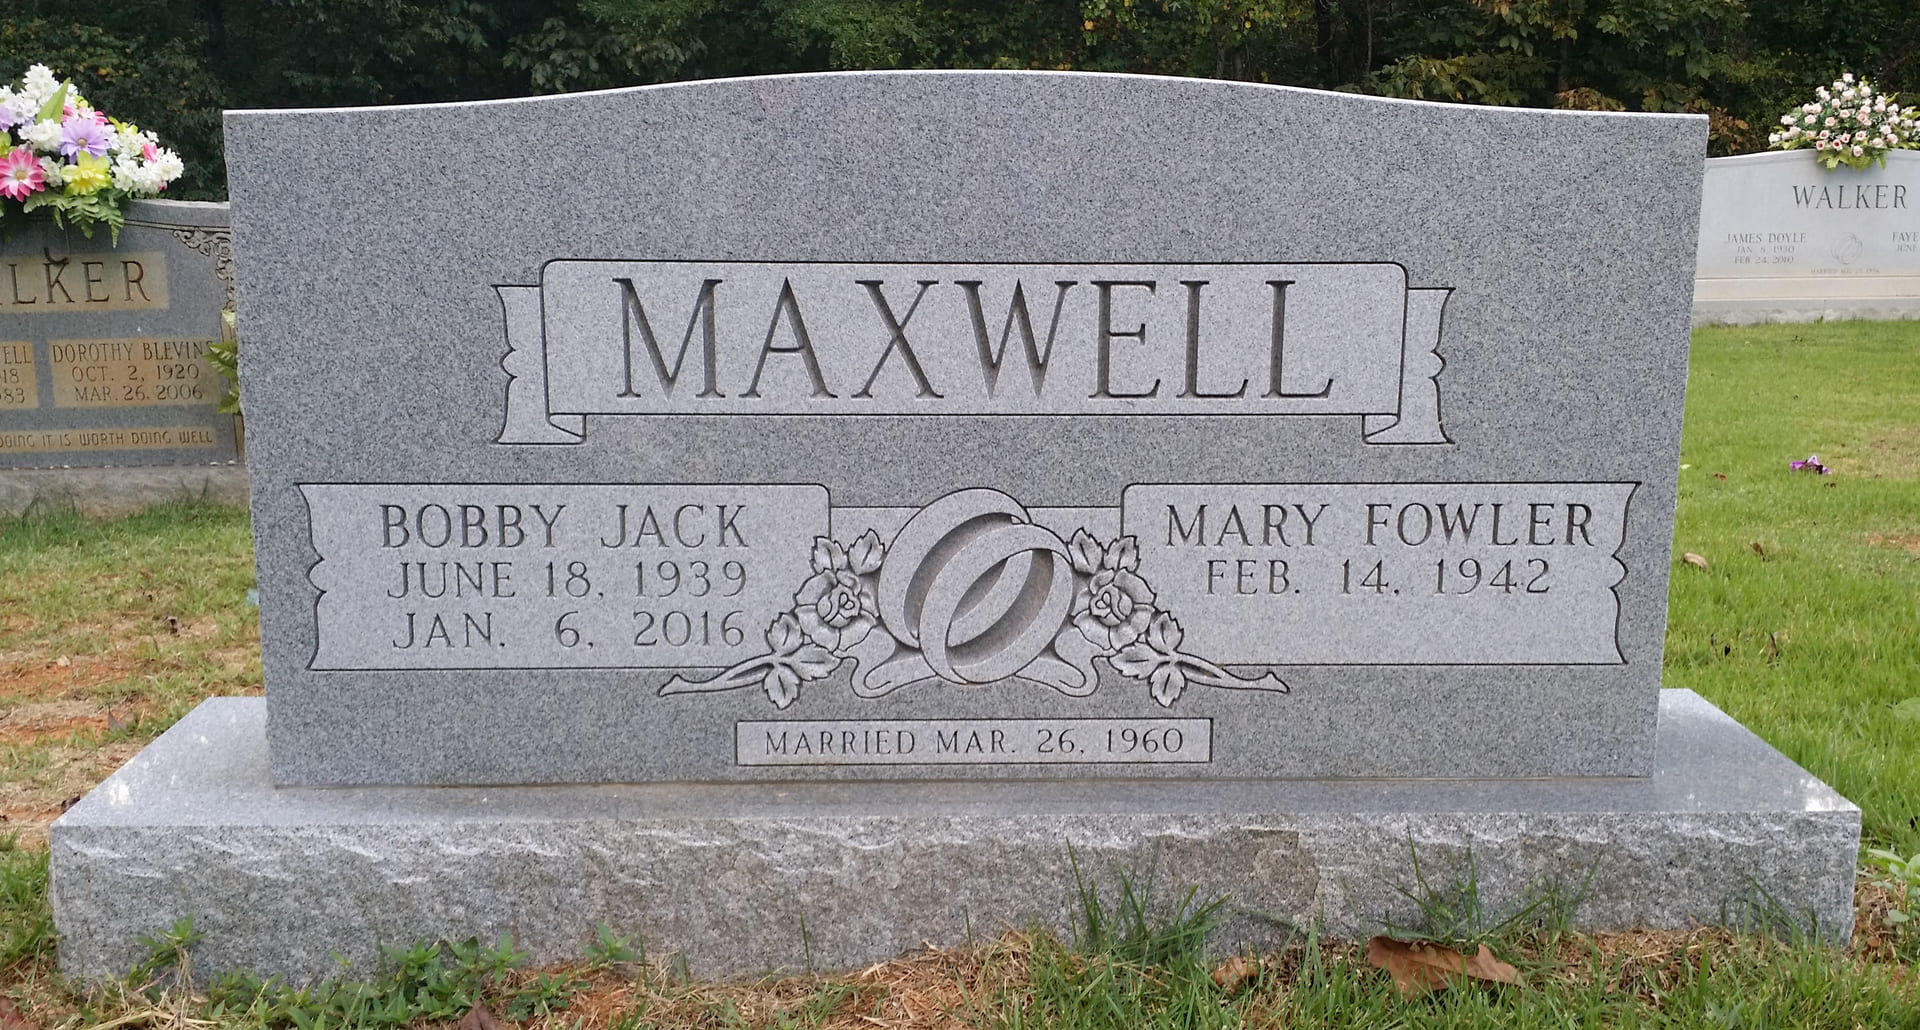 A memorial slab for Bobby Jack and Mary Fowler